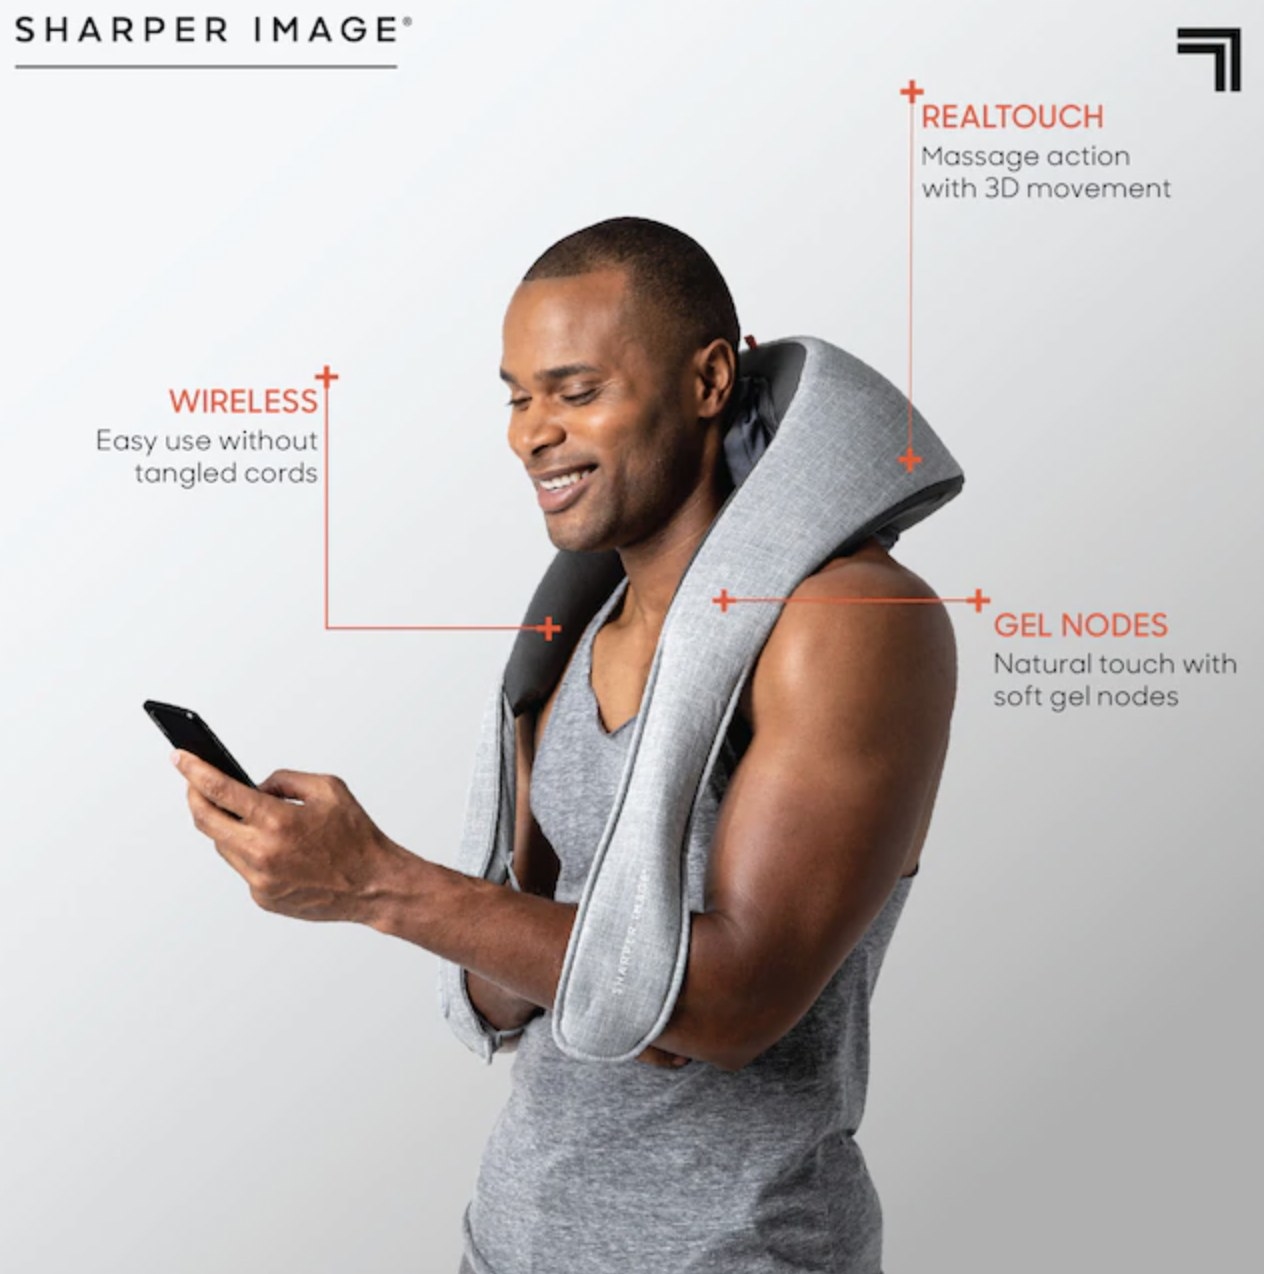 Model with the wrap draped over his shoulders. Features highlighted include realtouch massage action with 3D movement, wireless capability and natural touch with soft gel nodes